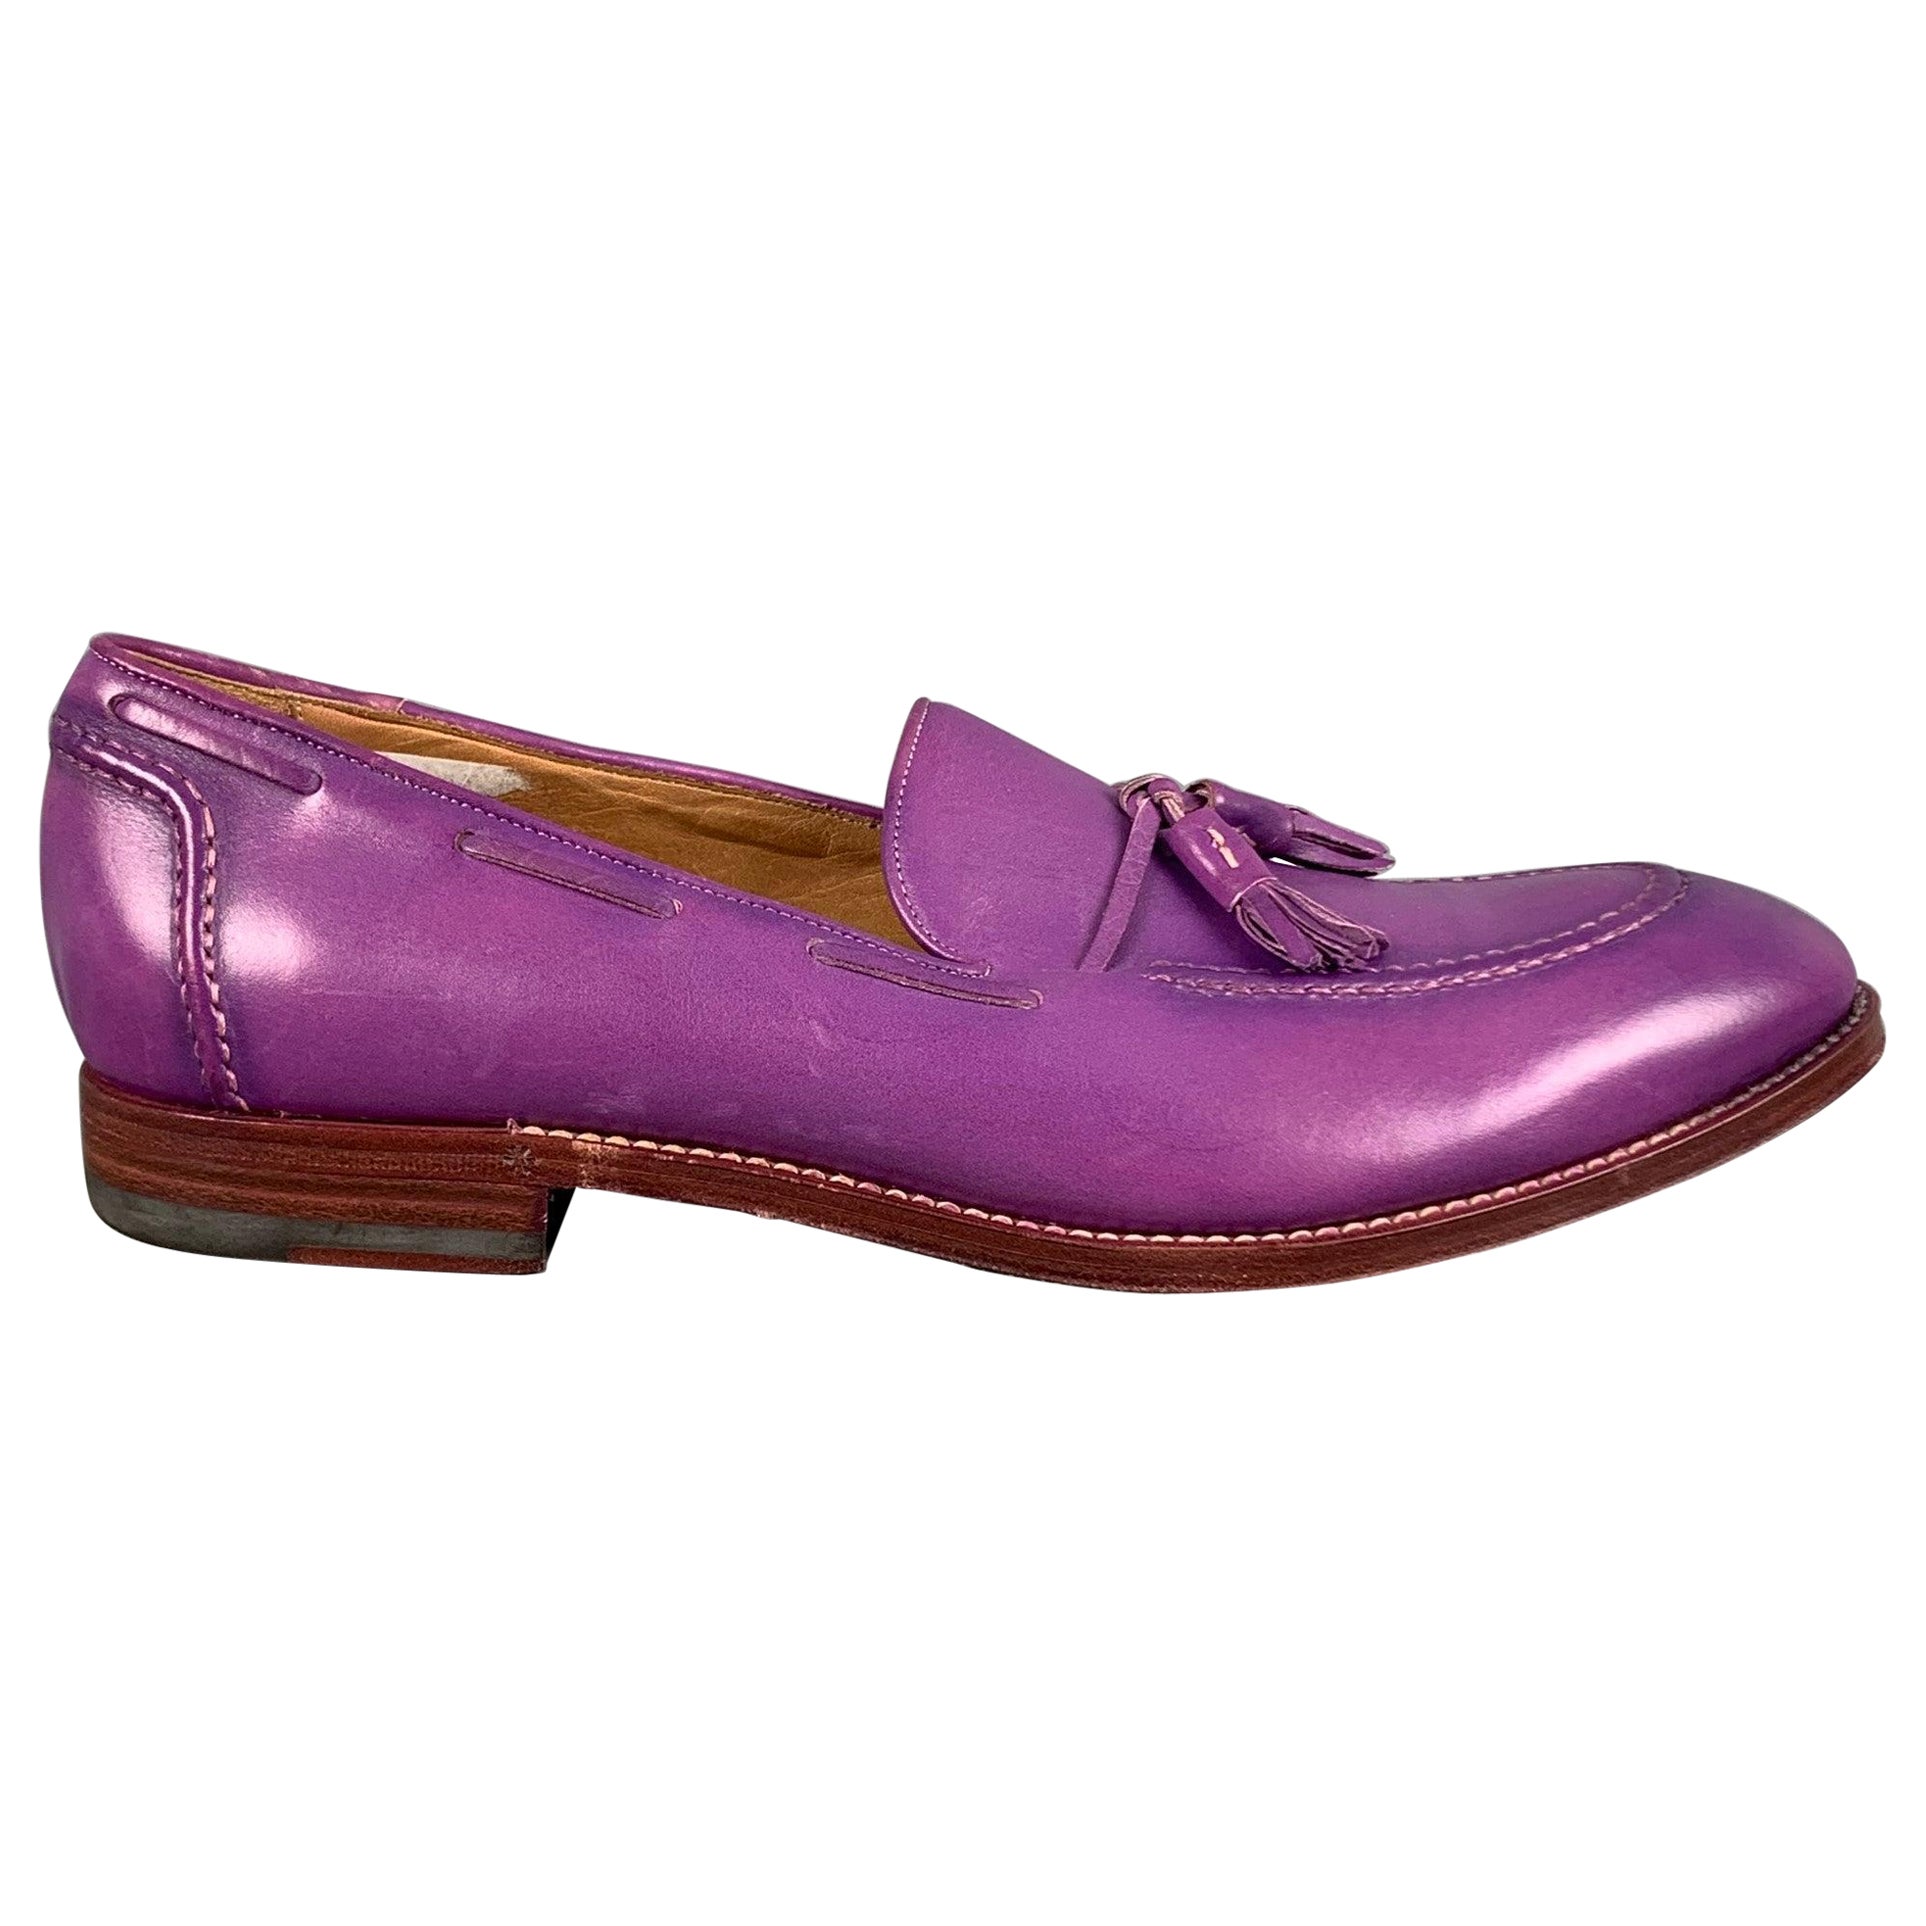 PAUL SMITH Size 9 Purple Antique Leather Tassels Loafers For Sale